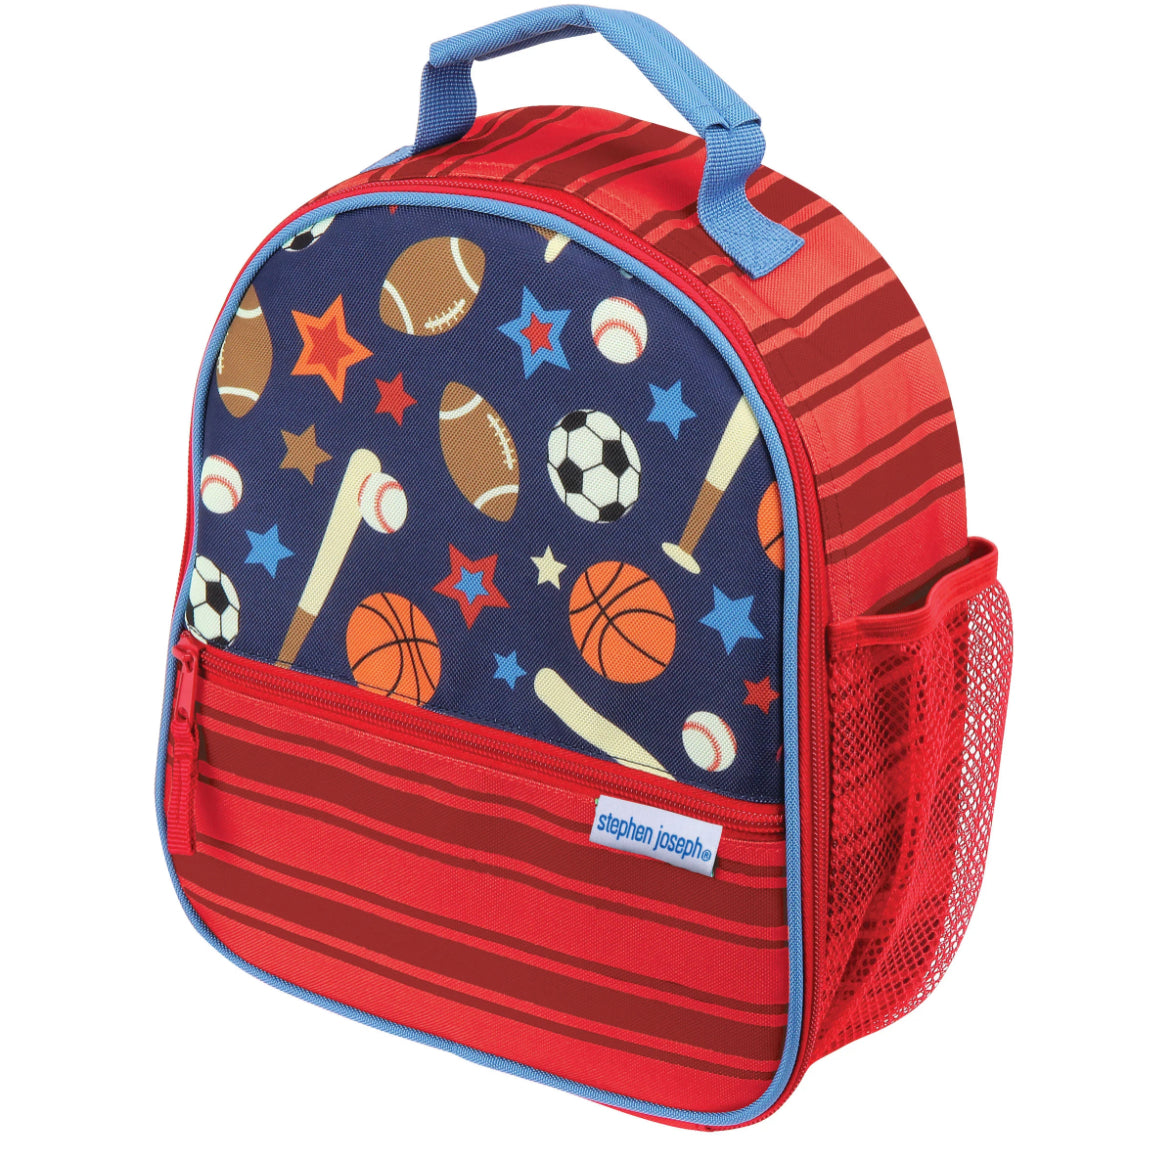 All Over Print Lunchbox, Sports